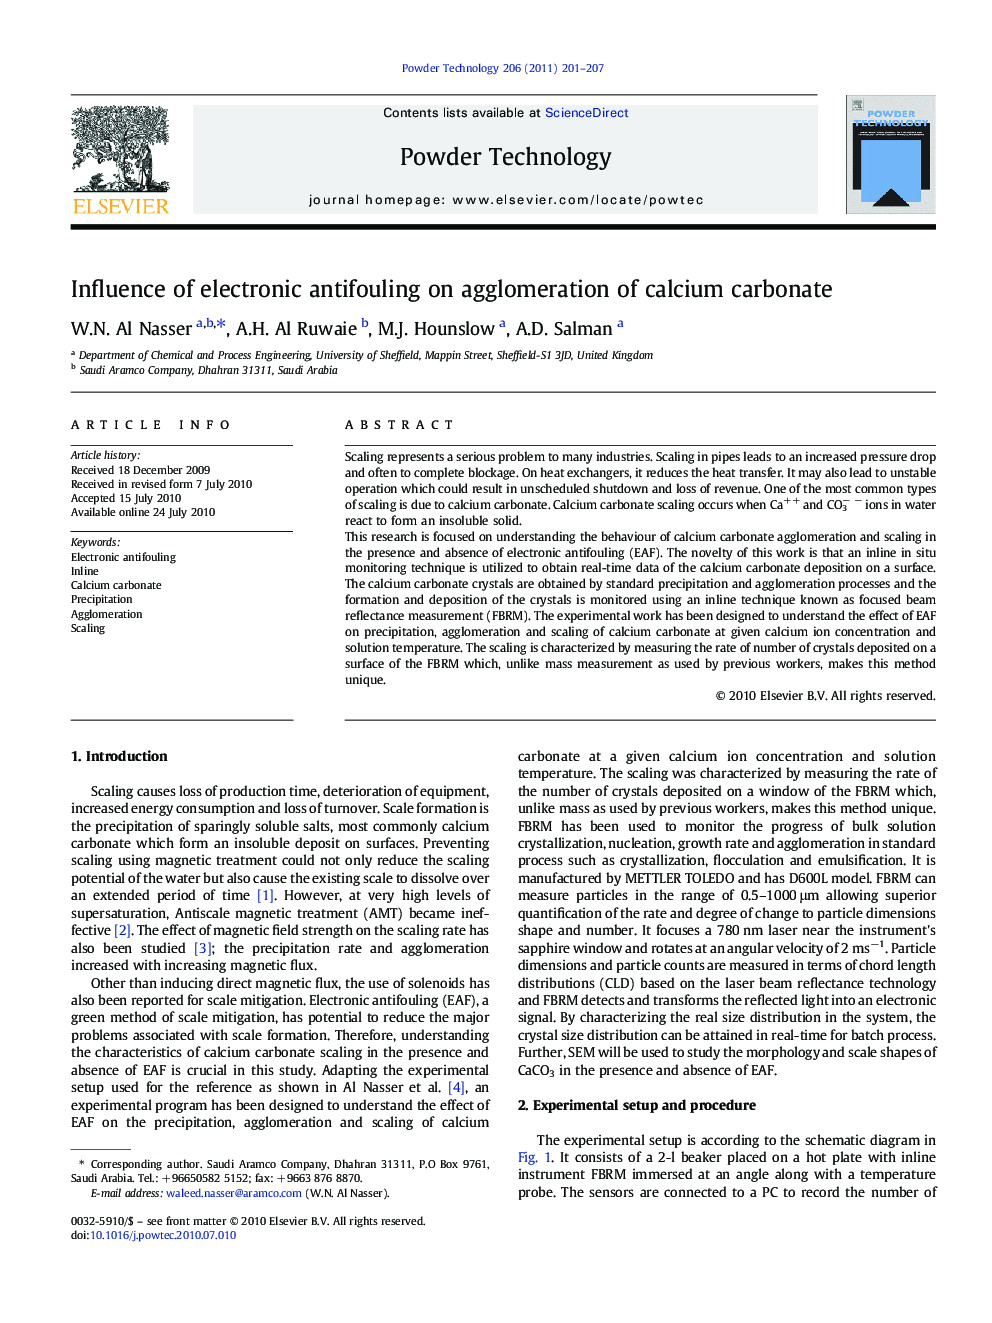 Influence of electronic antifouling on agglomeration of calcium carbonate